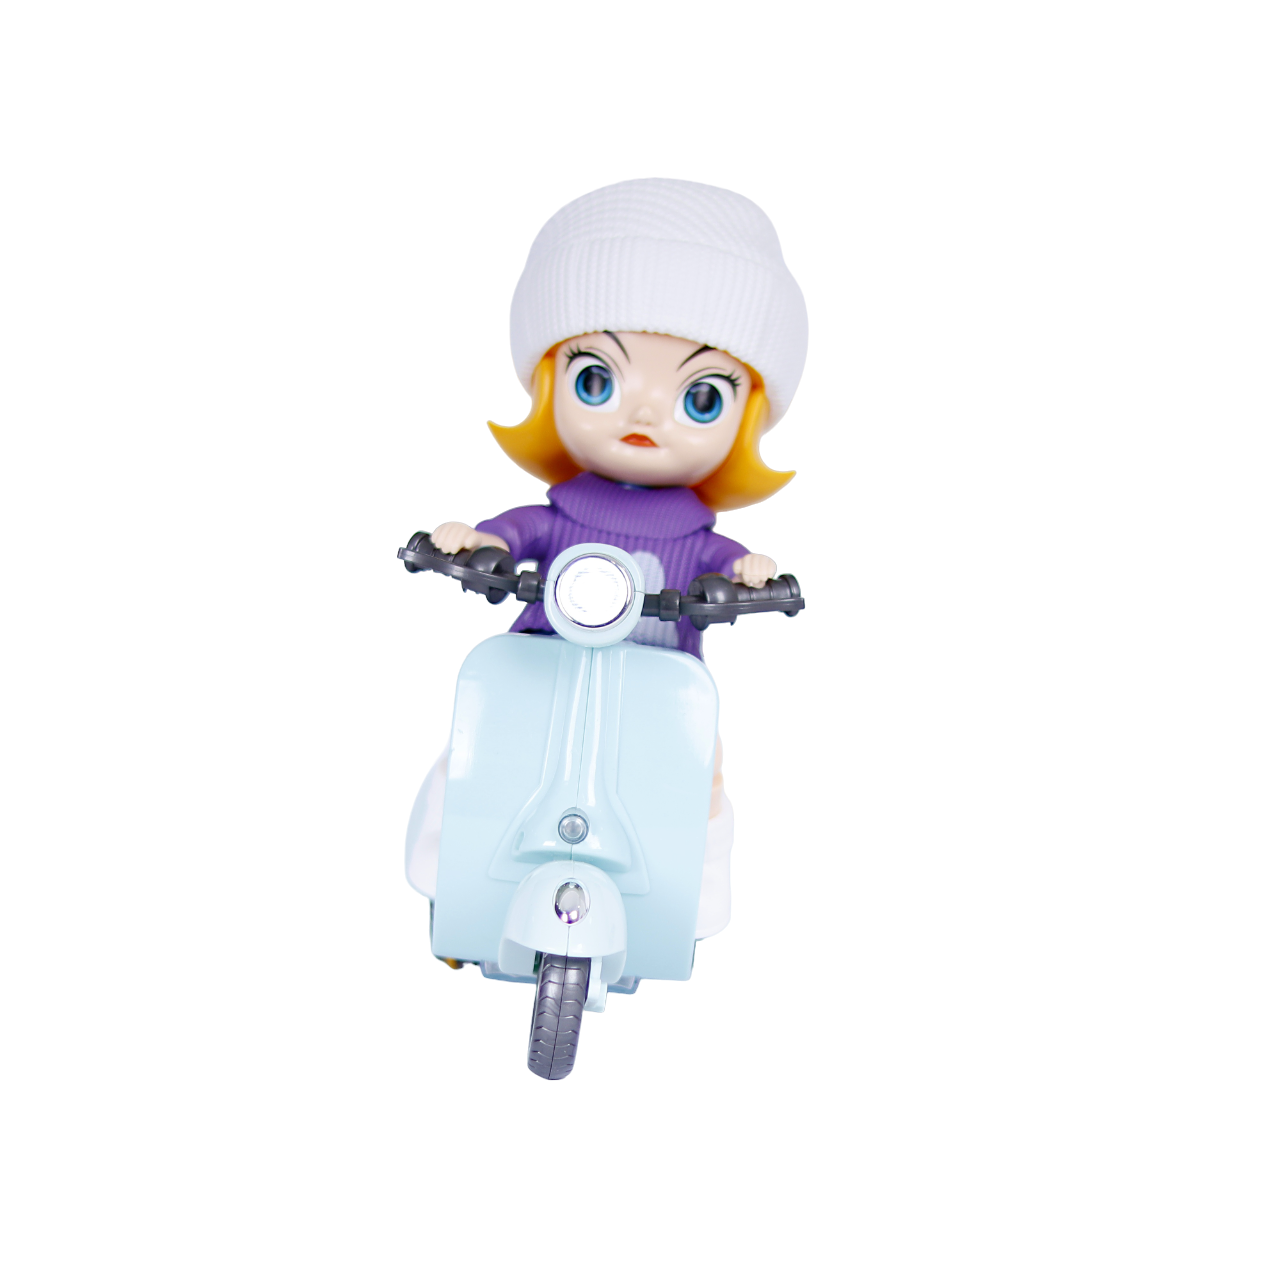 Scooty Stunt Star: A Musical Adventure Toy for Kids